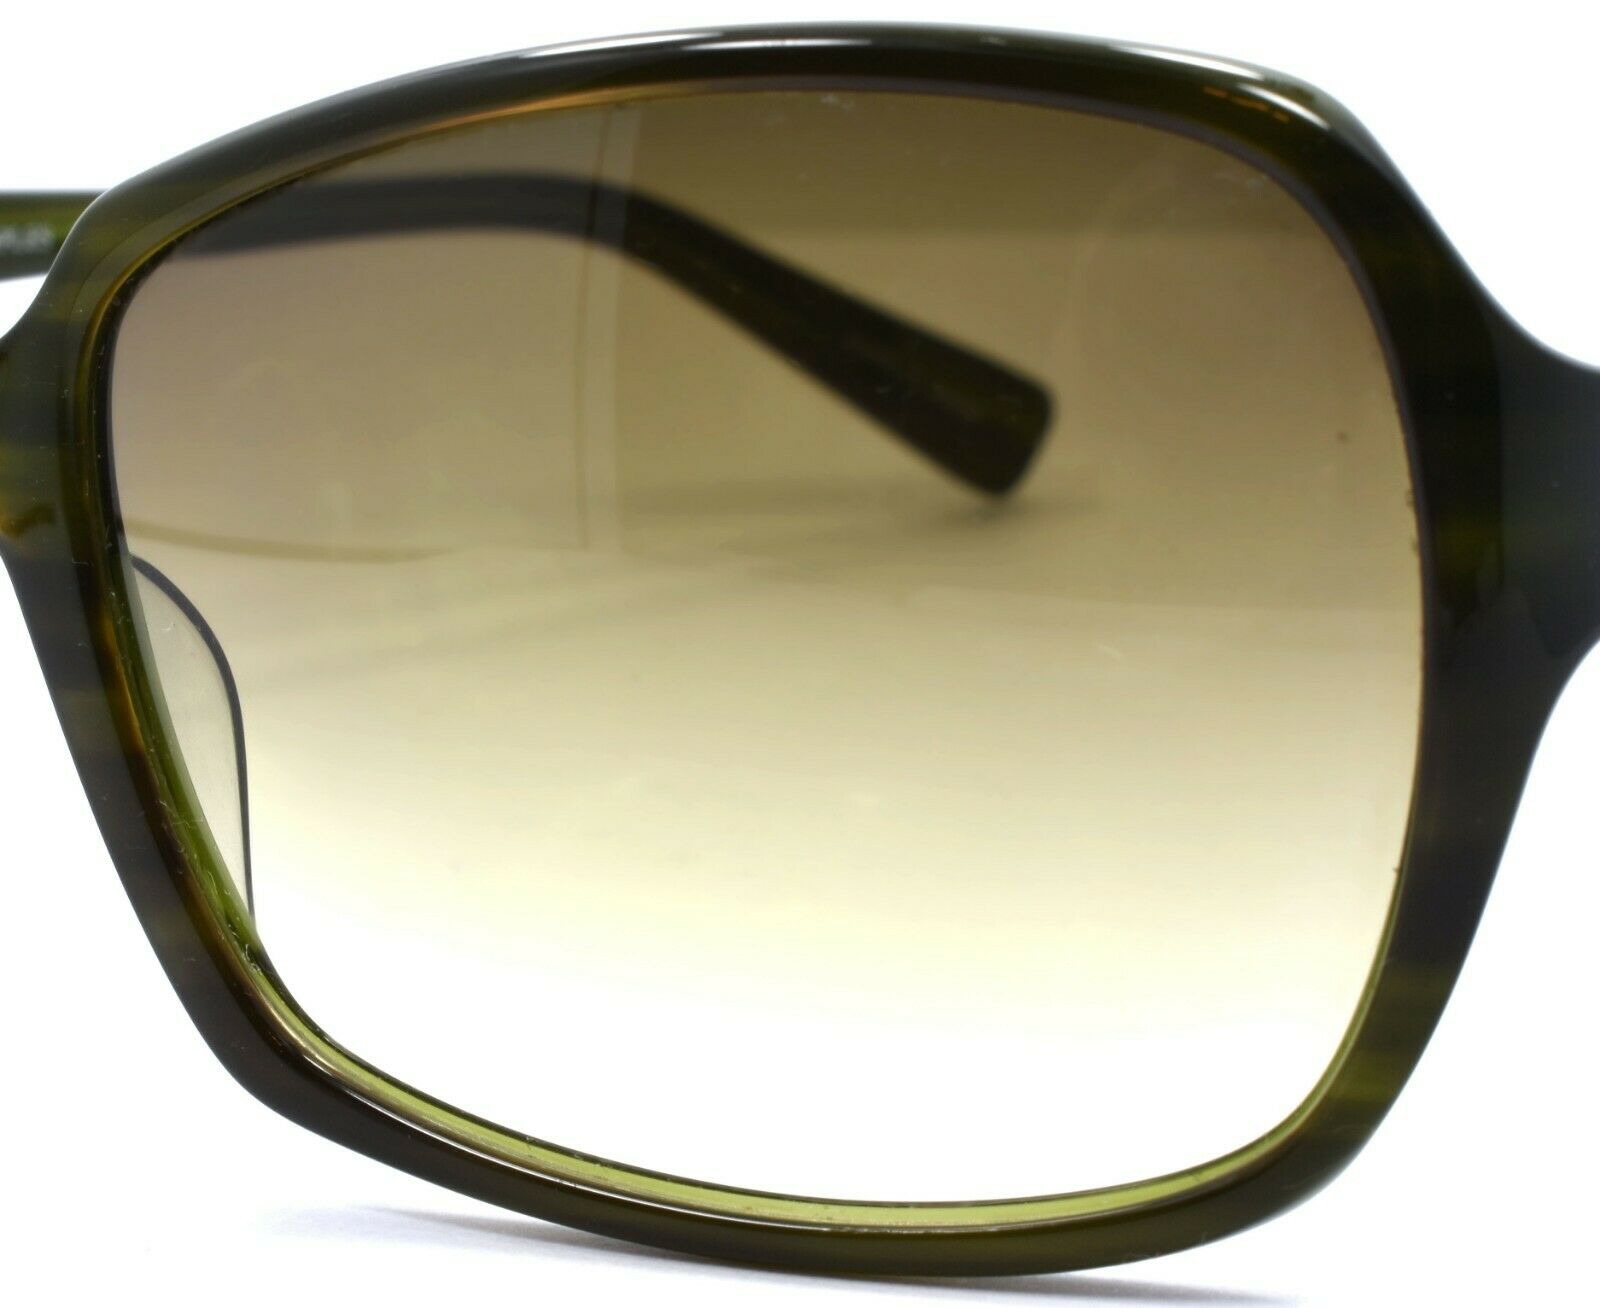 5-Oliver Peoples Candice ENV Women's Sunglasses Green / Green Gradient JAPAN-Does not apply-IKSpecs